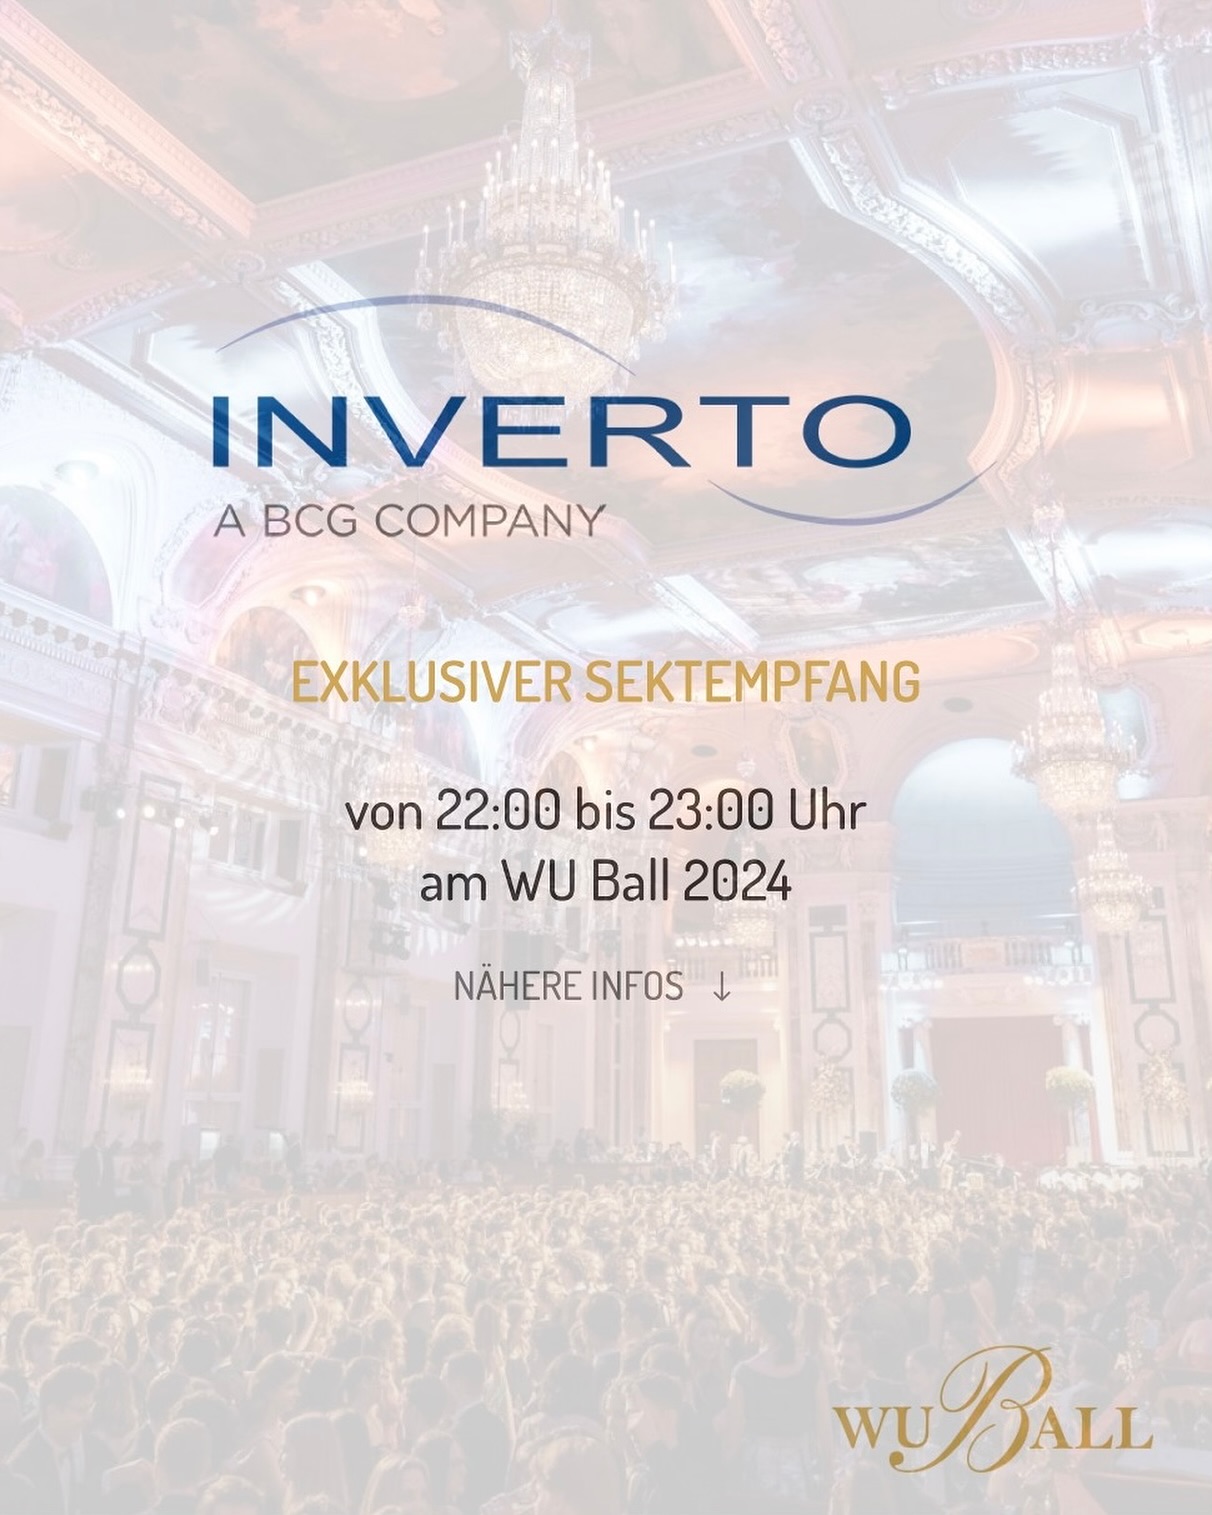 exclusive networking event powered by INVERTO, A BCG COMPANY